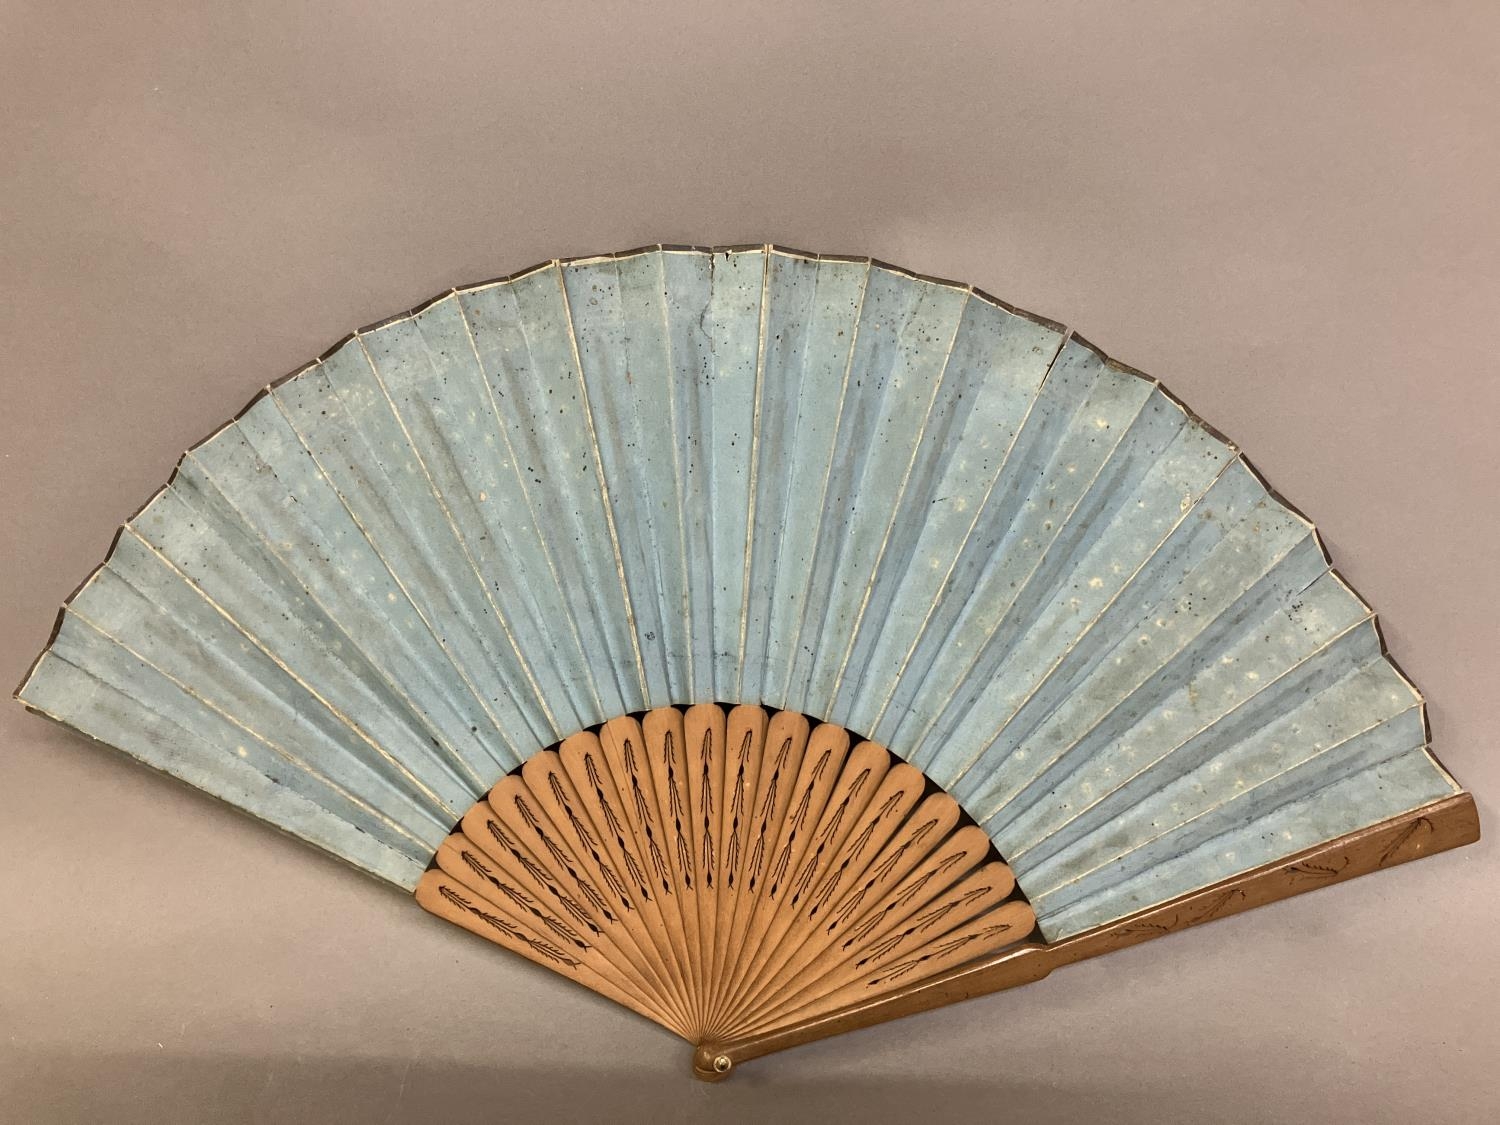 Two late 18th century wood fans, the first a brisé with rounded tips, pierced, with applied - Image 5 of 7